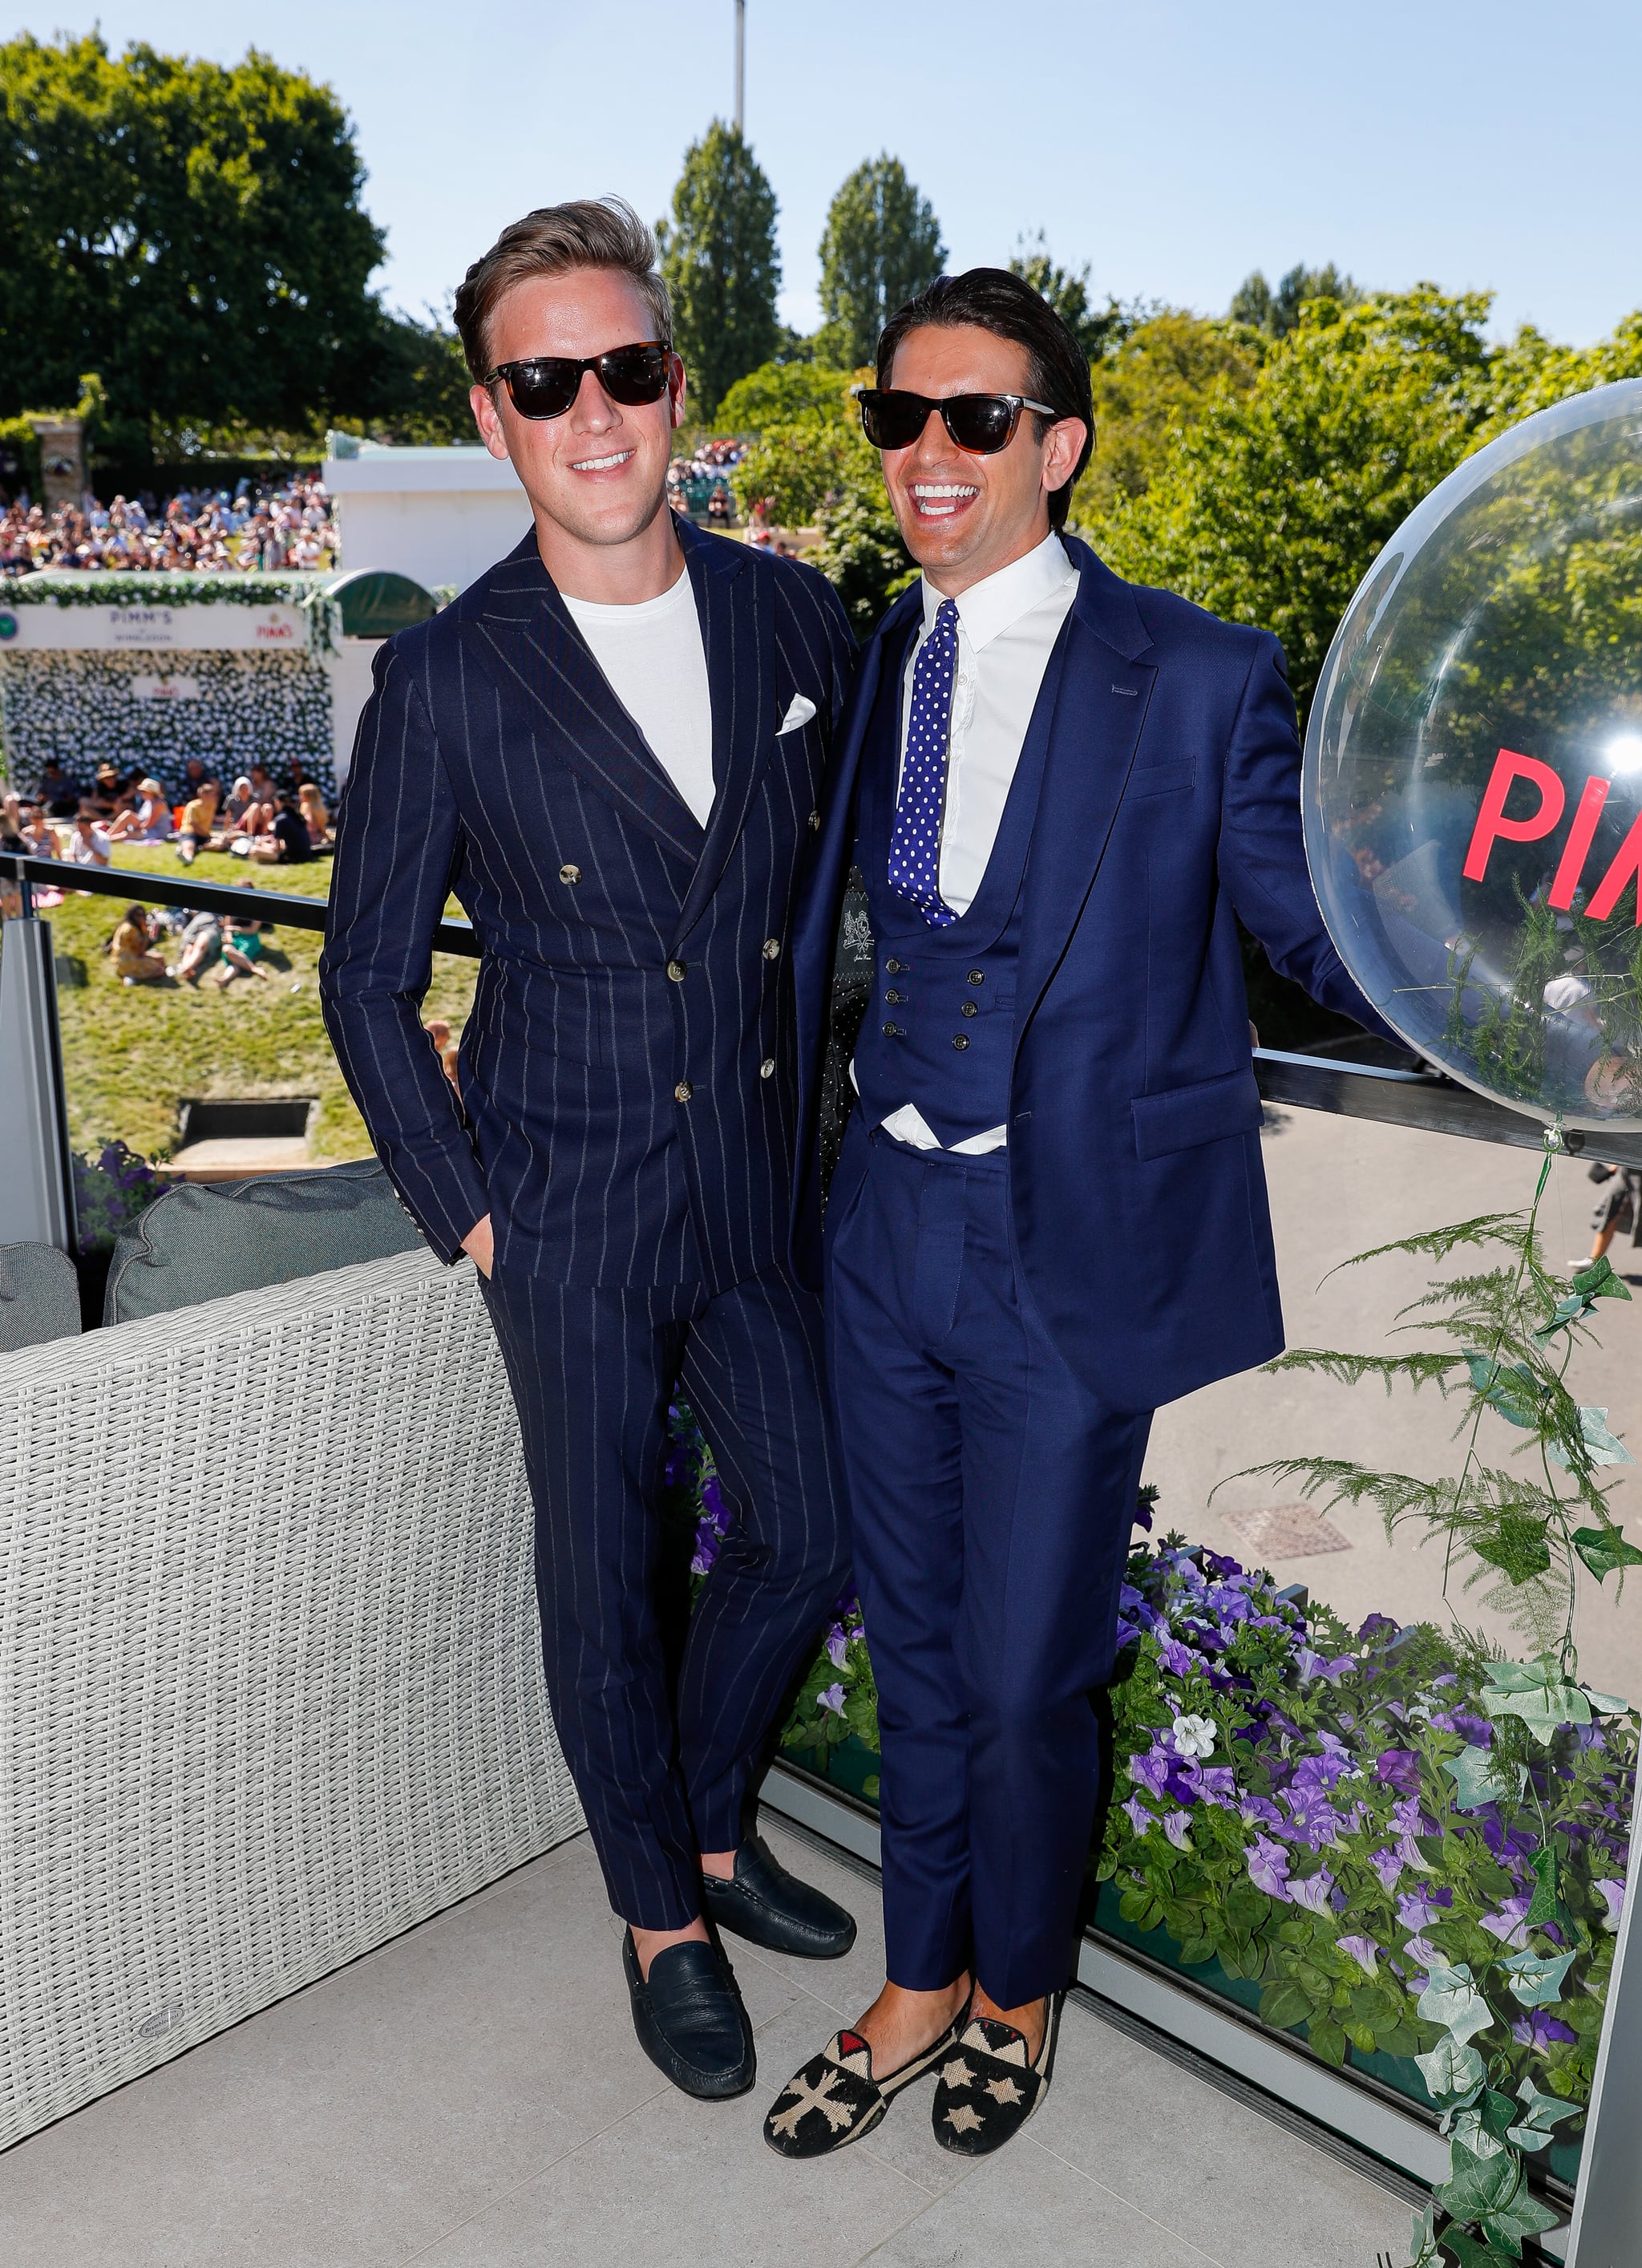 LONDON, ENGLAND - JULY 04: Gareth Locke and Ollie Locke at the Pimm's No.1 Suite The Championships at Wimbledon on July 4, 2019 in London, England. (Photo by David M. Benett/Dave Benett/Getty Images for Pimm's)